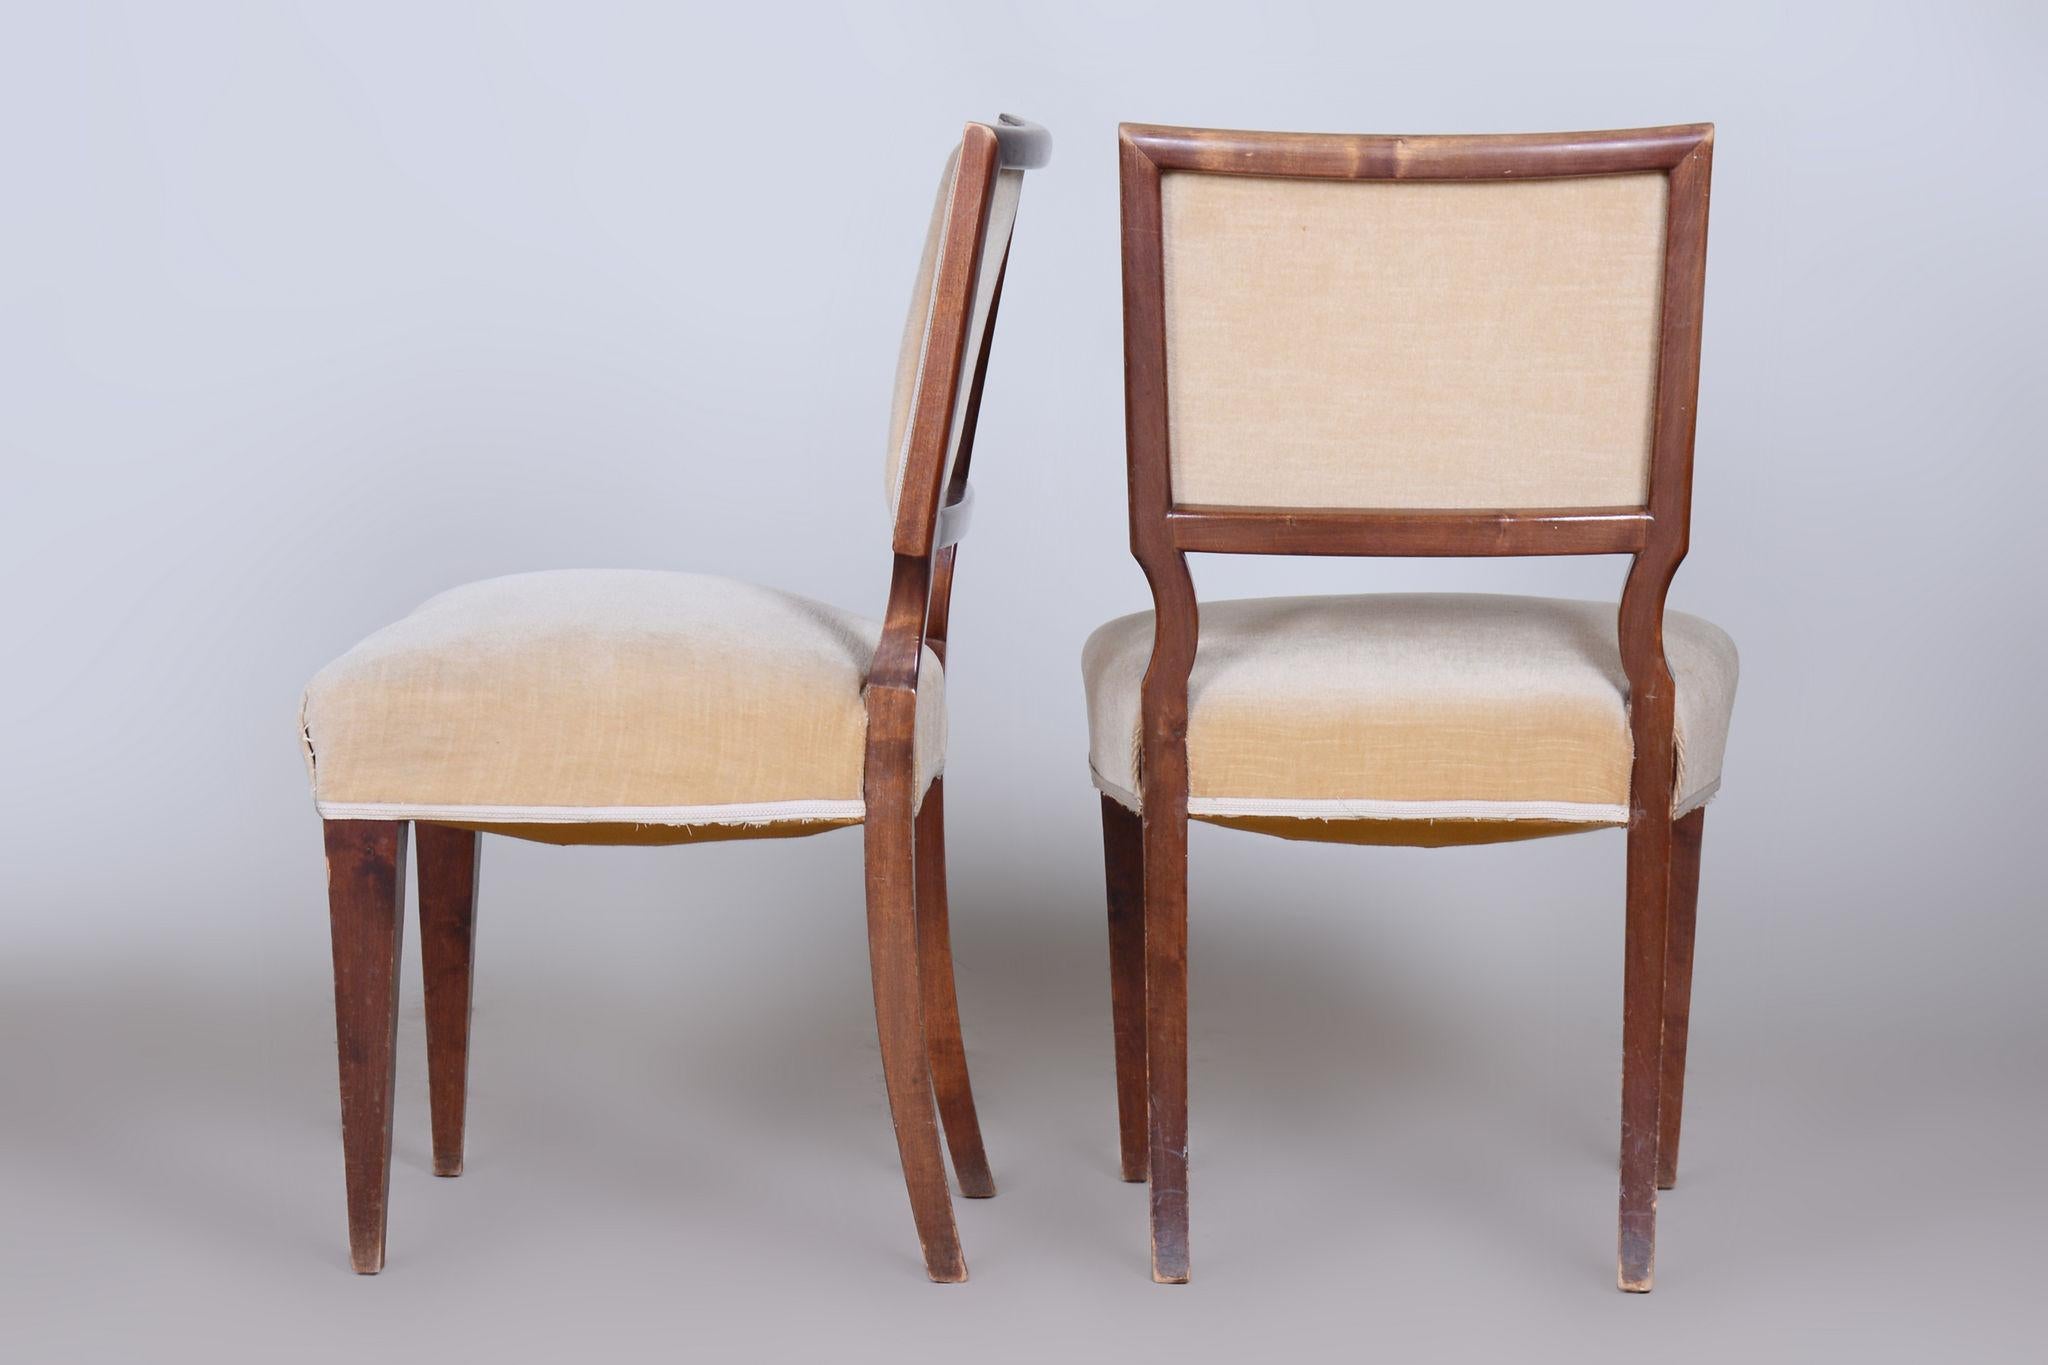 Set of Six Original Art Deco Chairs, Solid Walnut, France, 1920s For Sale 3